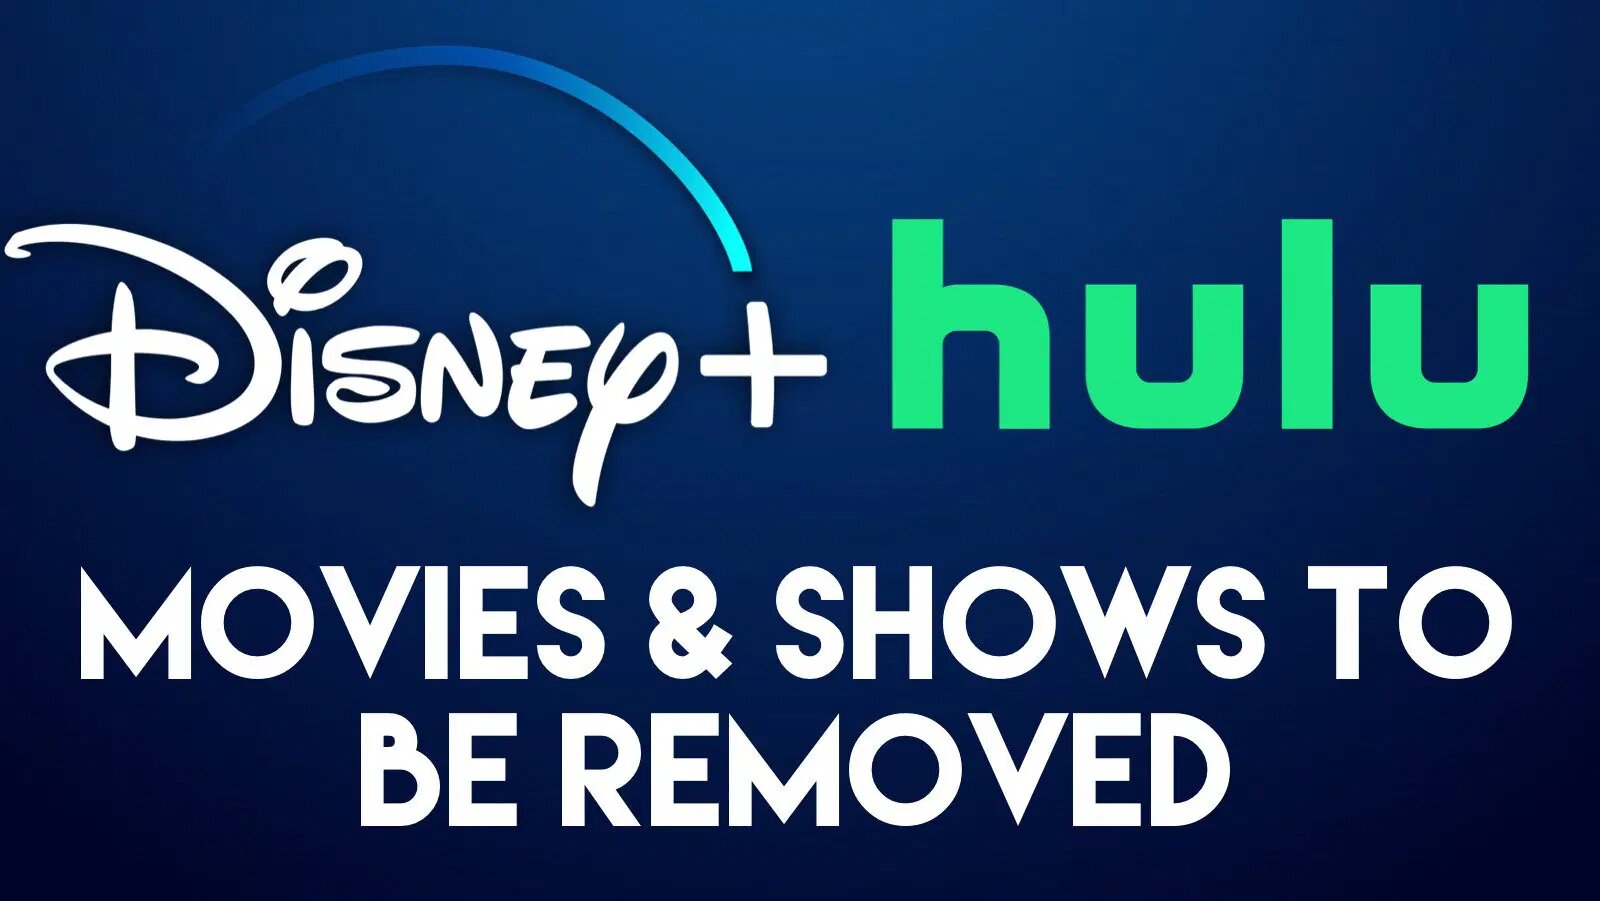 Disney Plans Content Removal from Disney+ or Hulu